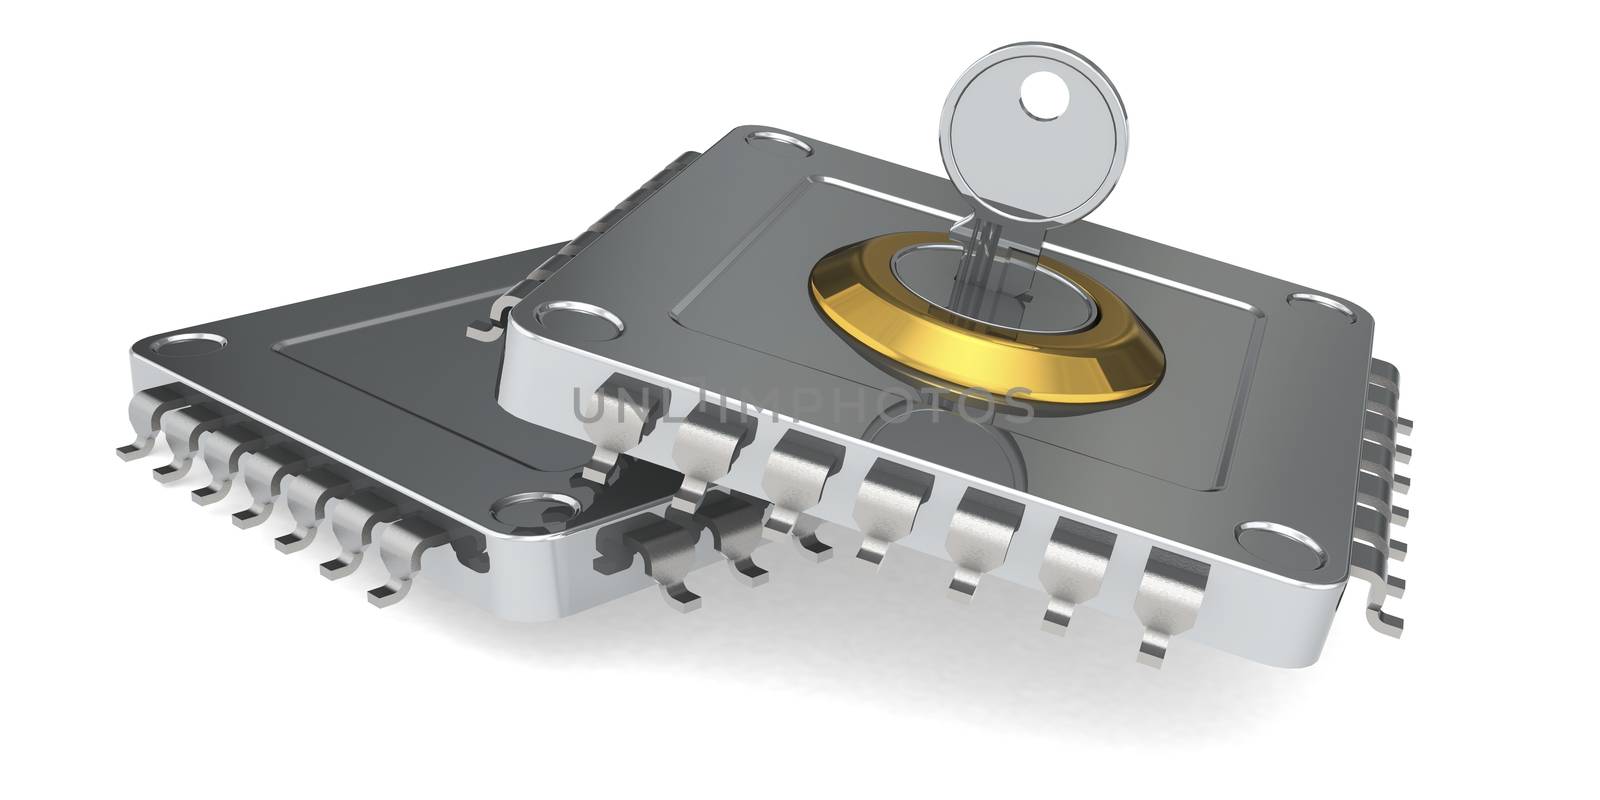 Key and computer microchip isolated, 3D rendering